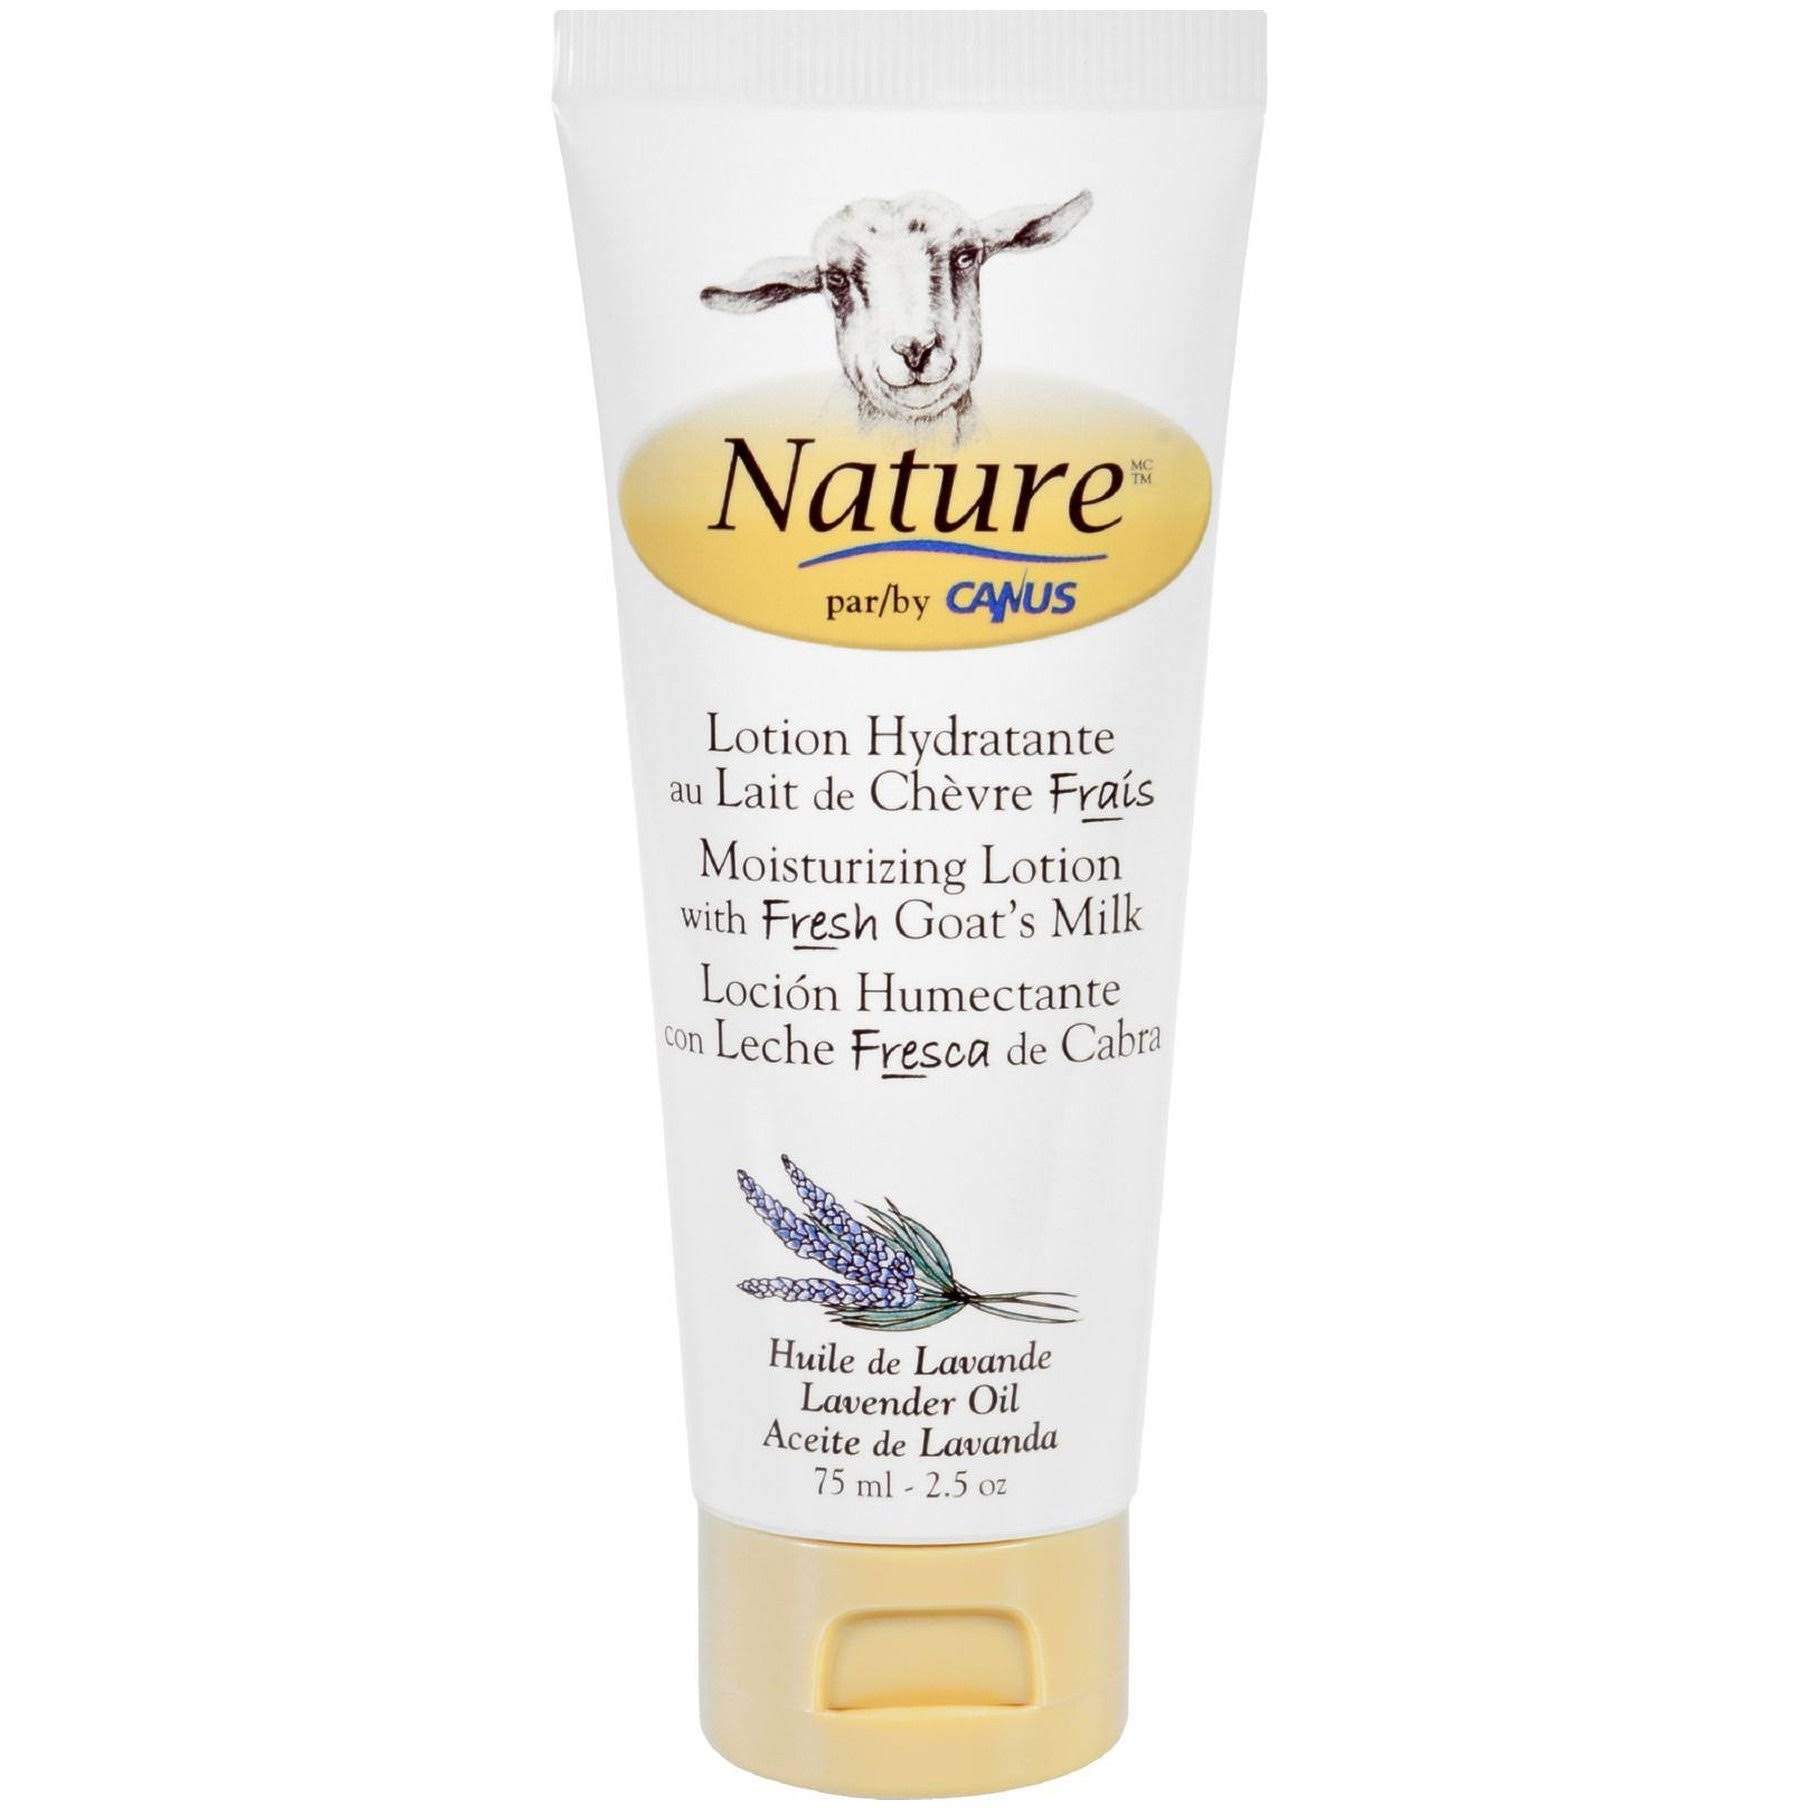 Nature by Canus Lotion Lavender Oil - 2.5oz